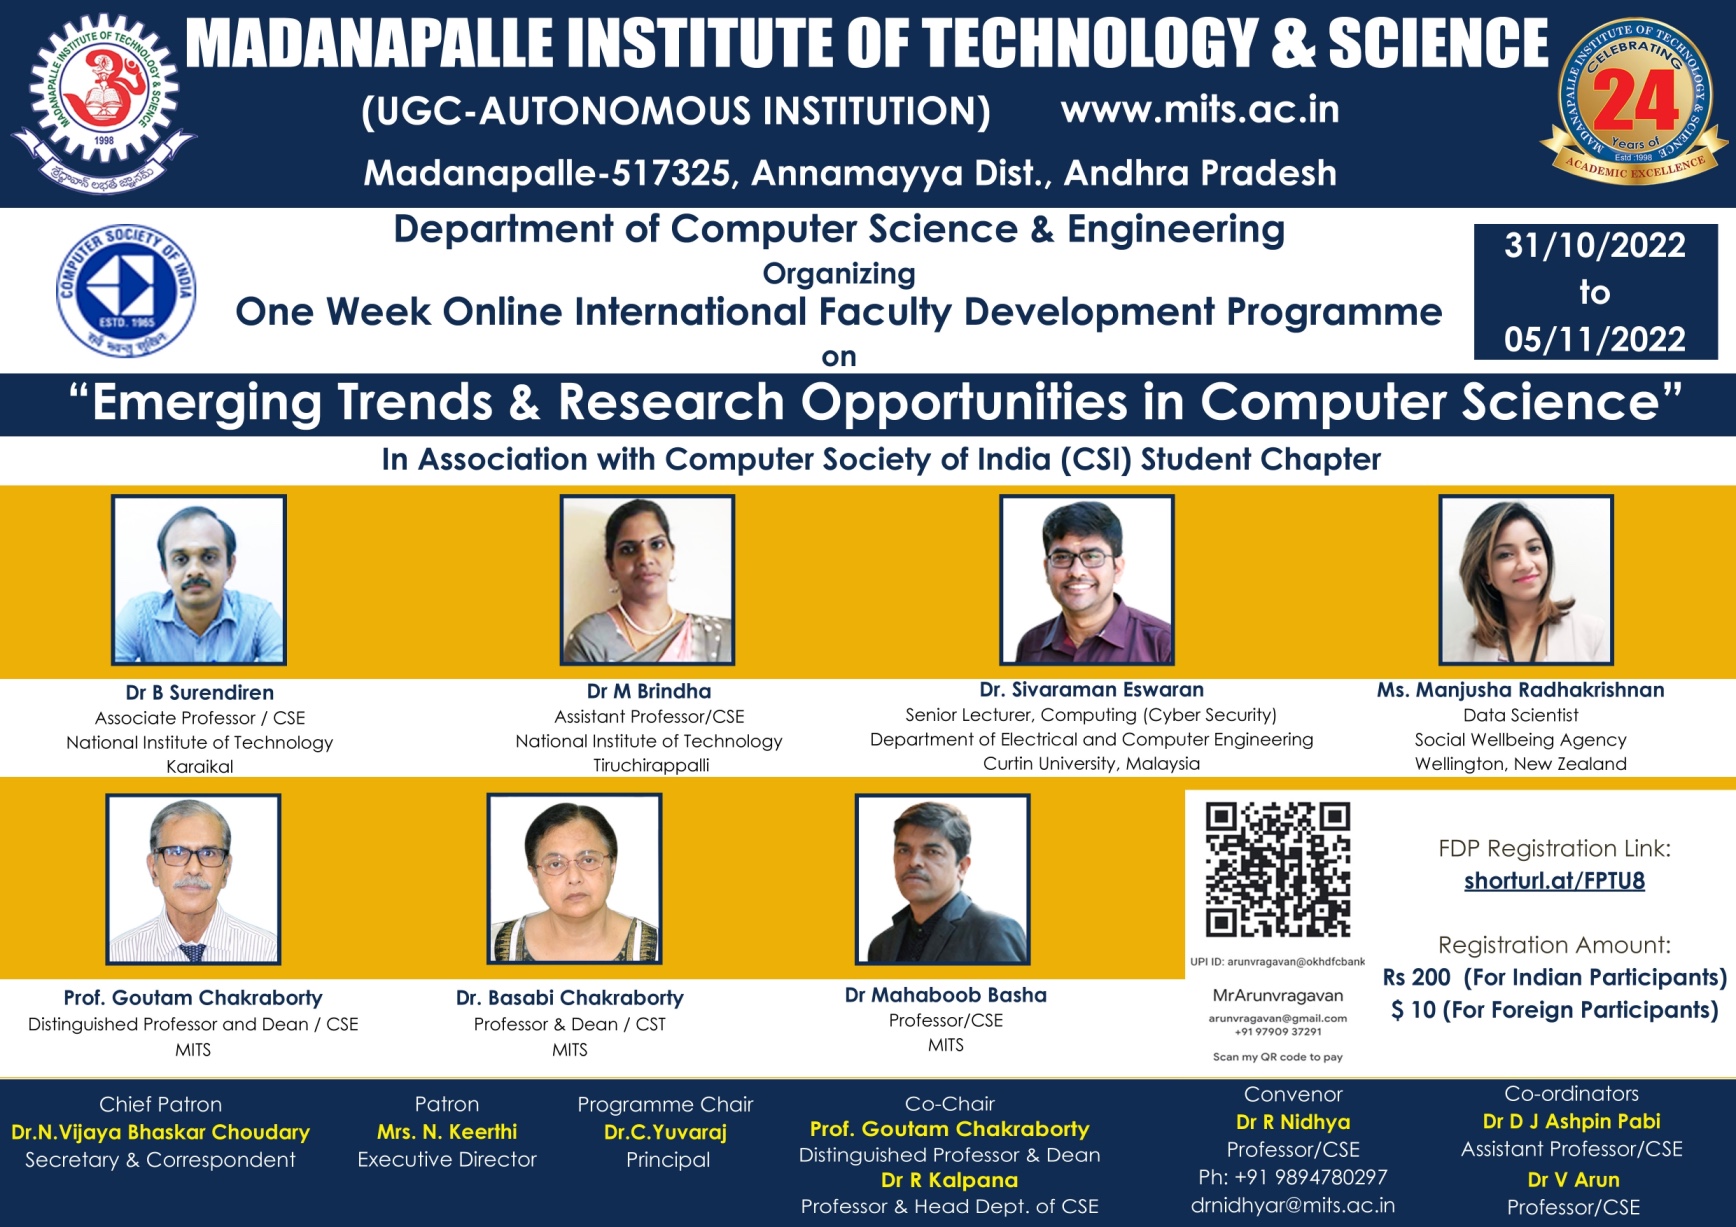 Emerging Trends and Research Opportunities in Computer Science 2022